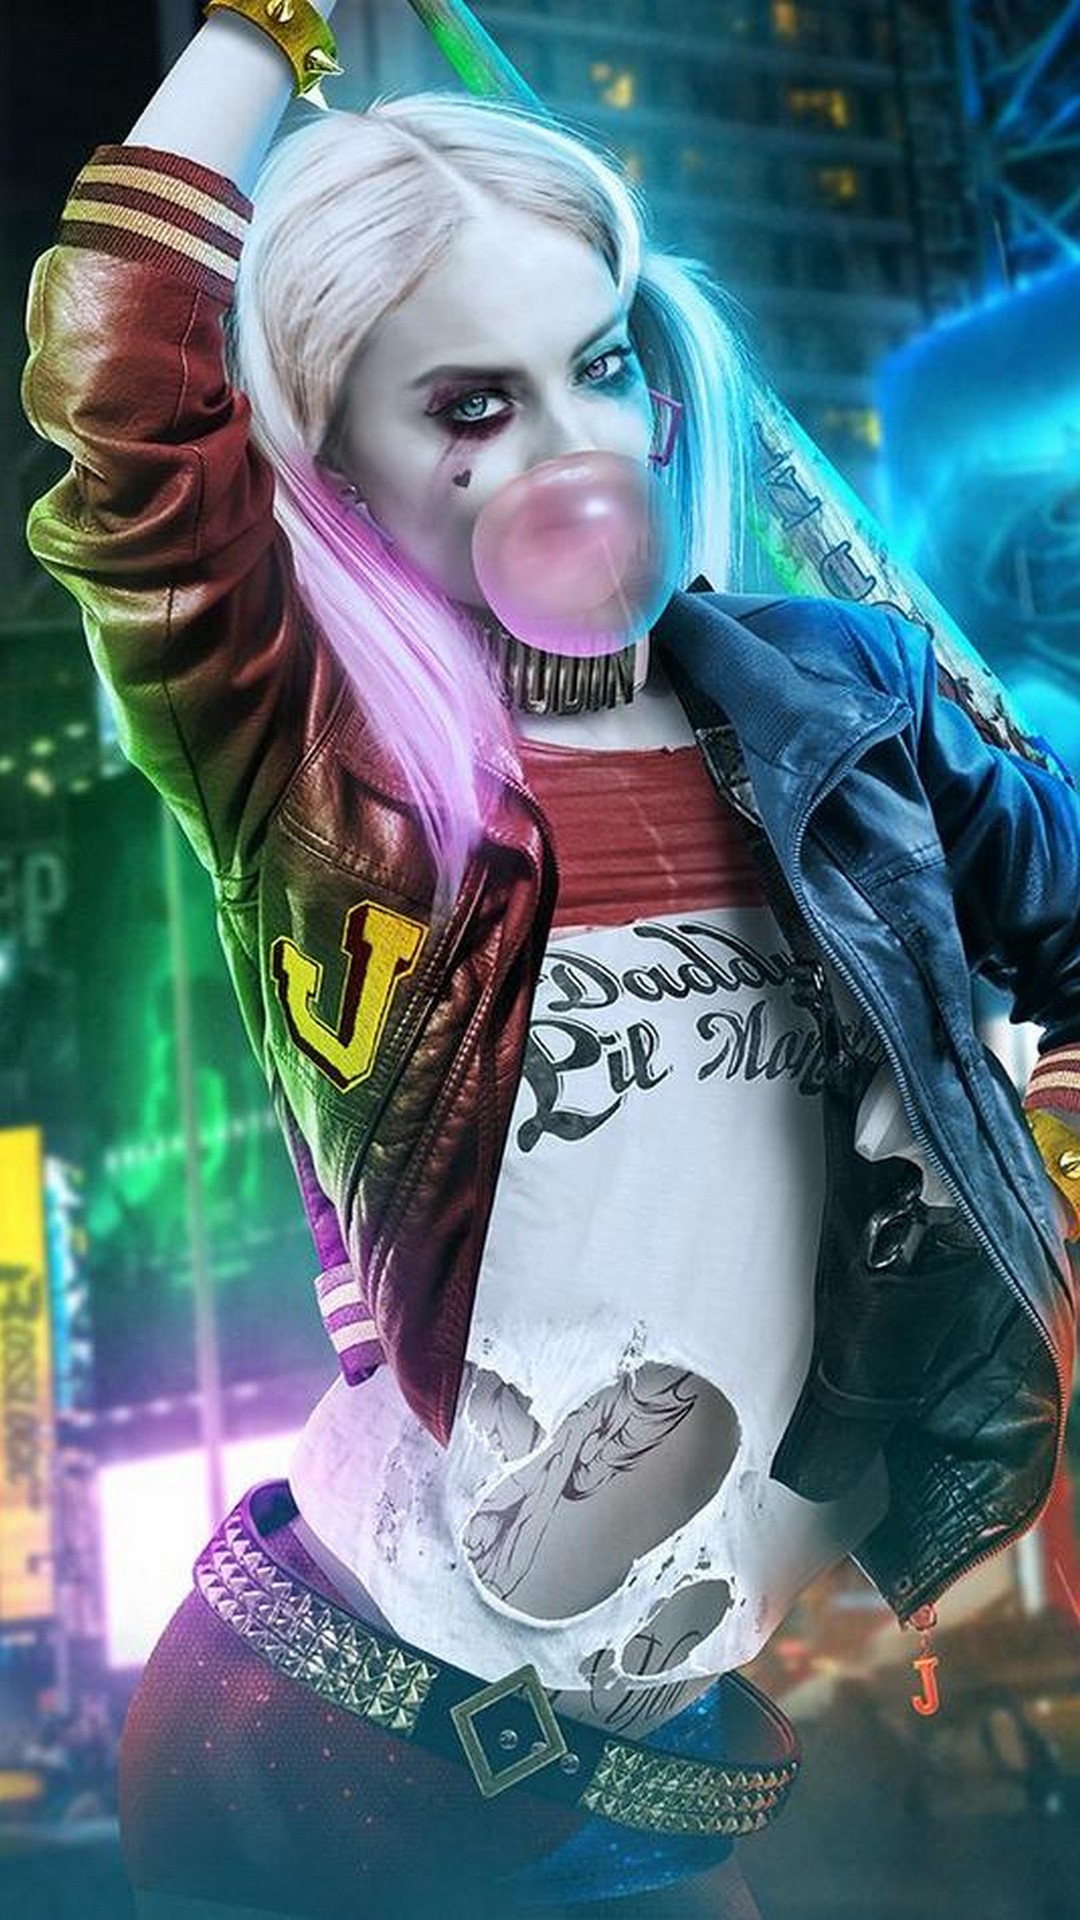 Harley Quinn Shirt Wallpaper iPhone with image resolution 1080x1920 pixel. You can make this wallpaper for your iPhone 5, 6, 7, 8, X backgrounds, Mobile Screensaver, or iPad Lock Screen